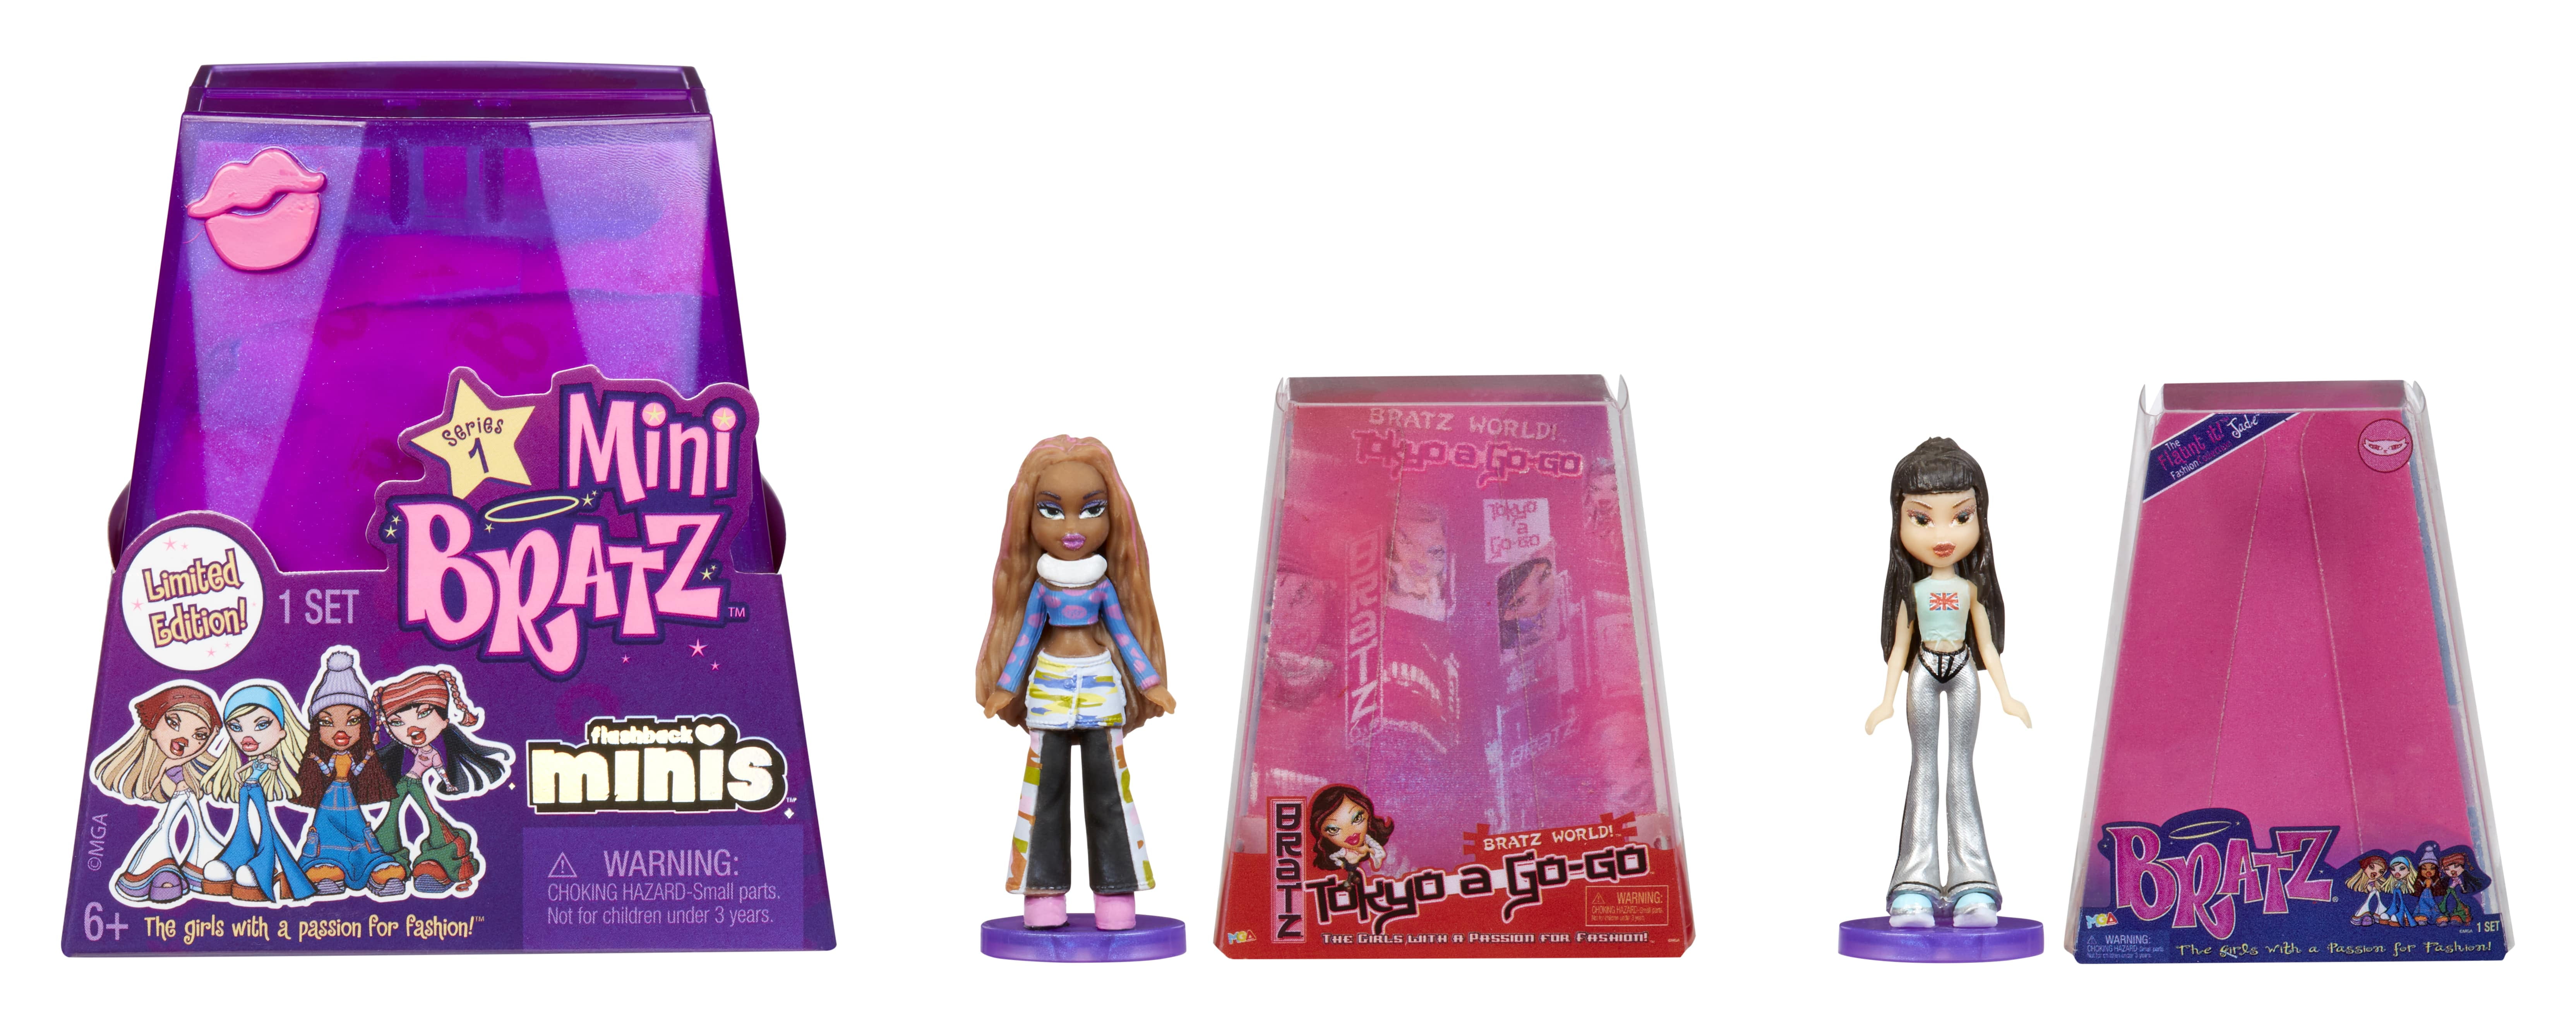 Boxy Girls Fashion Pack Season 2 New in Packaging discount postage available 